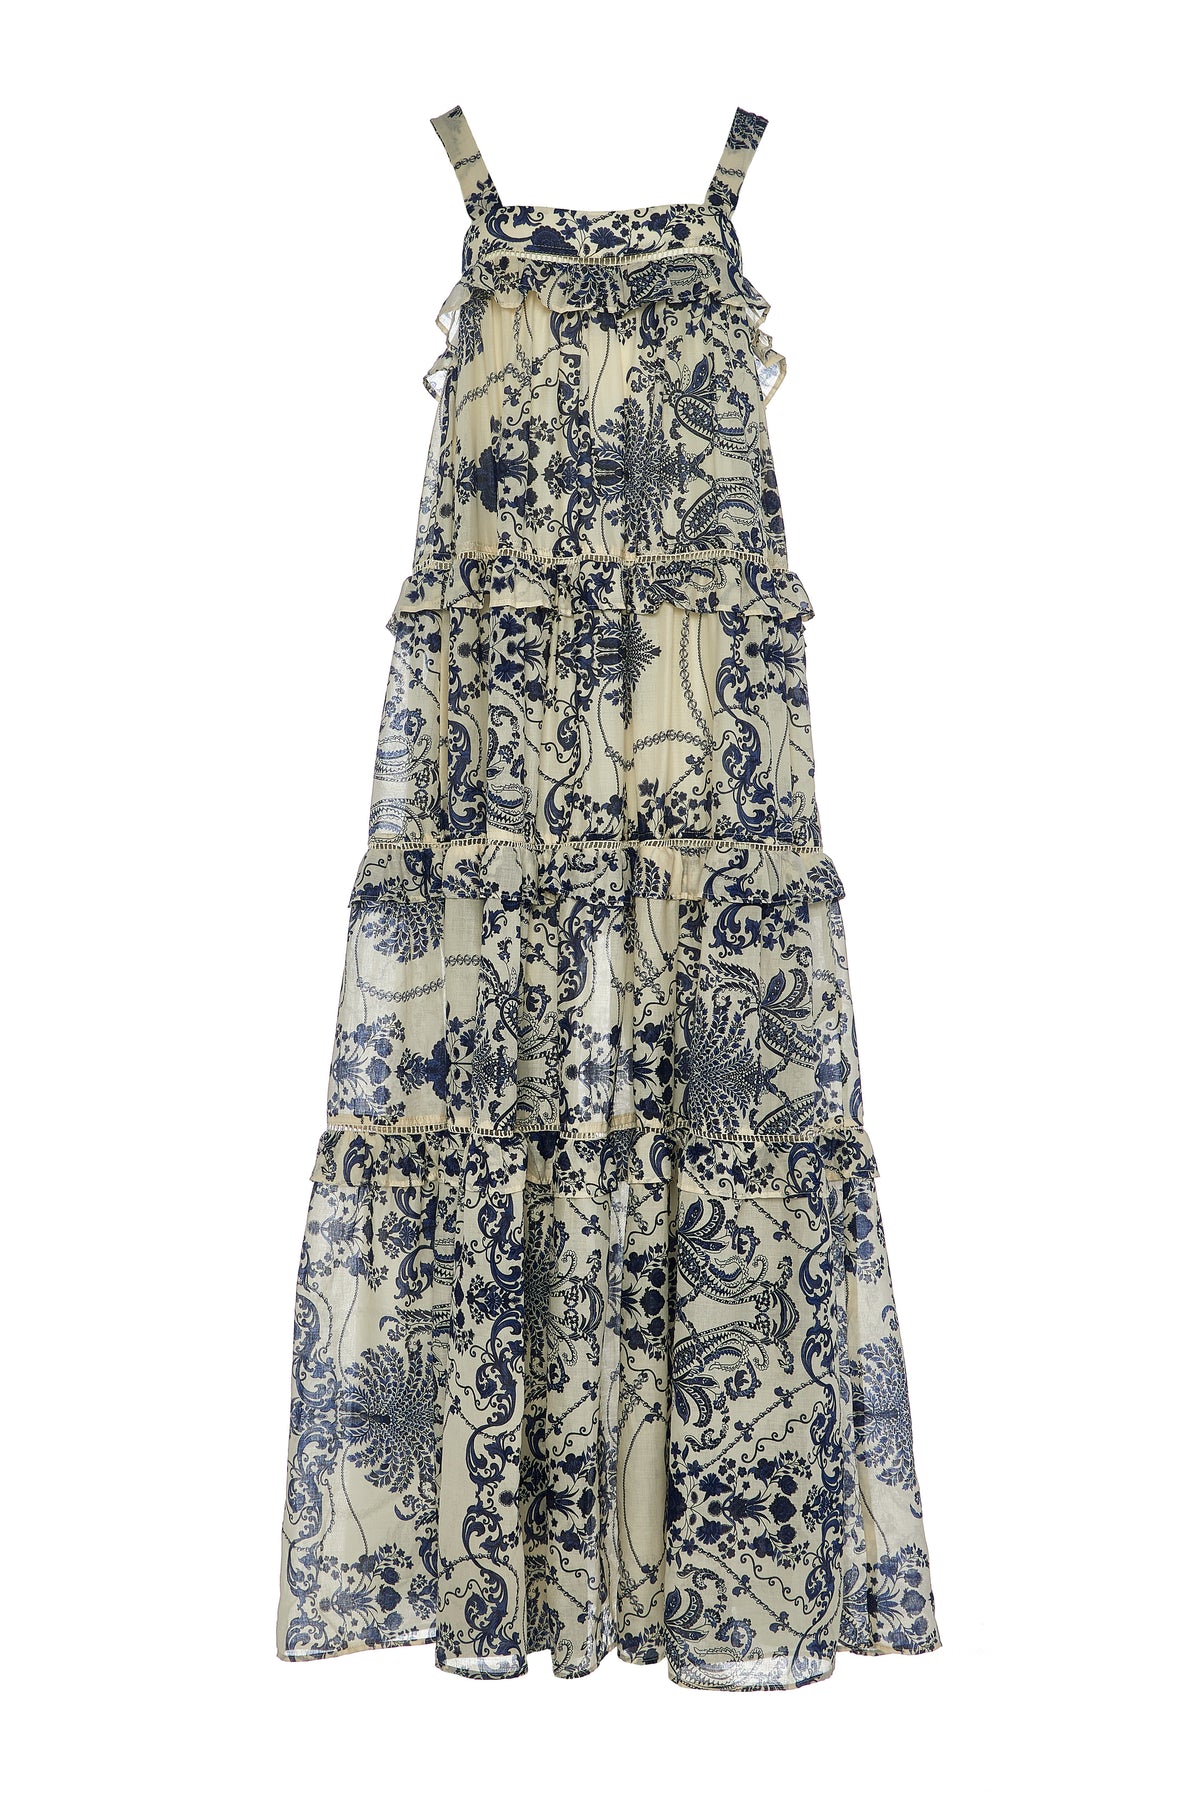 Long tiered maxi dress with ruffles in a navy and ecru willow inspired print